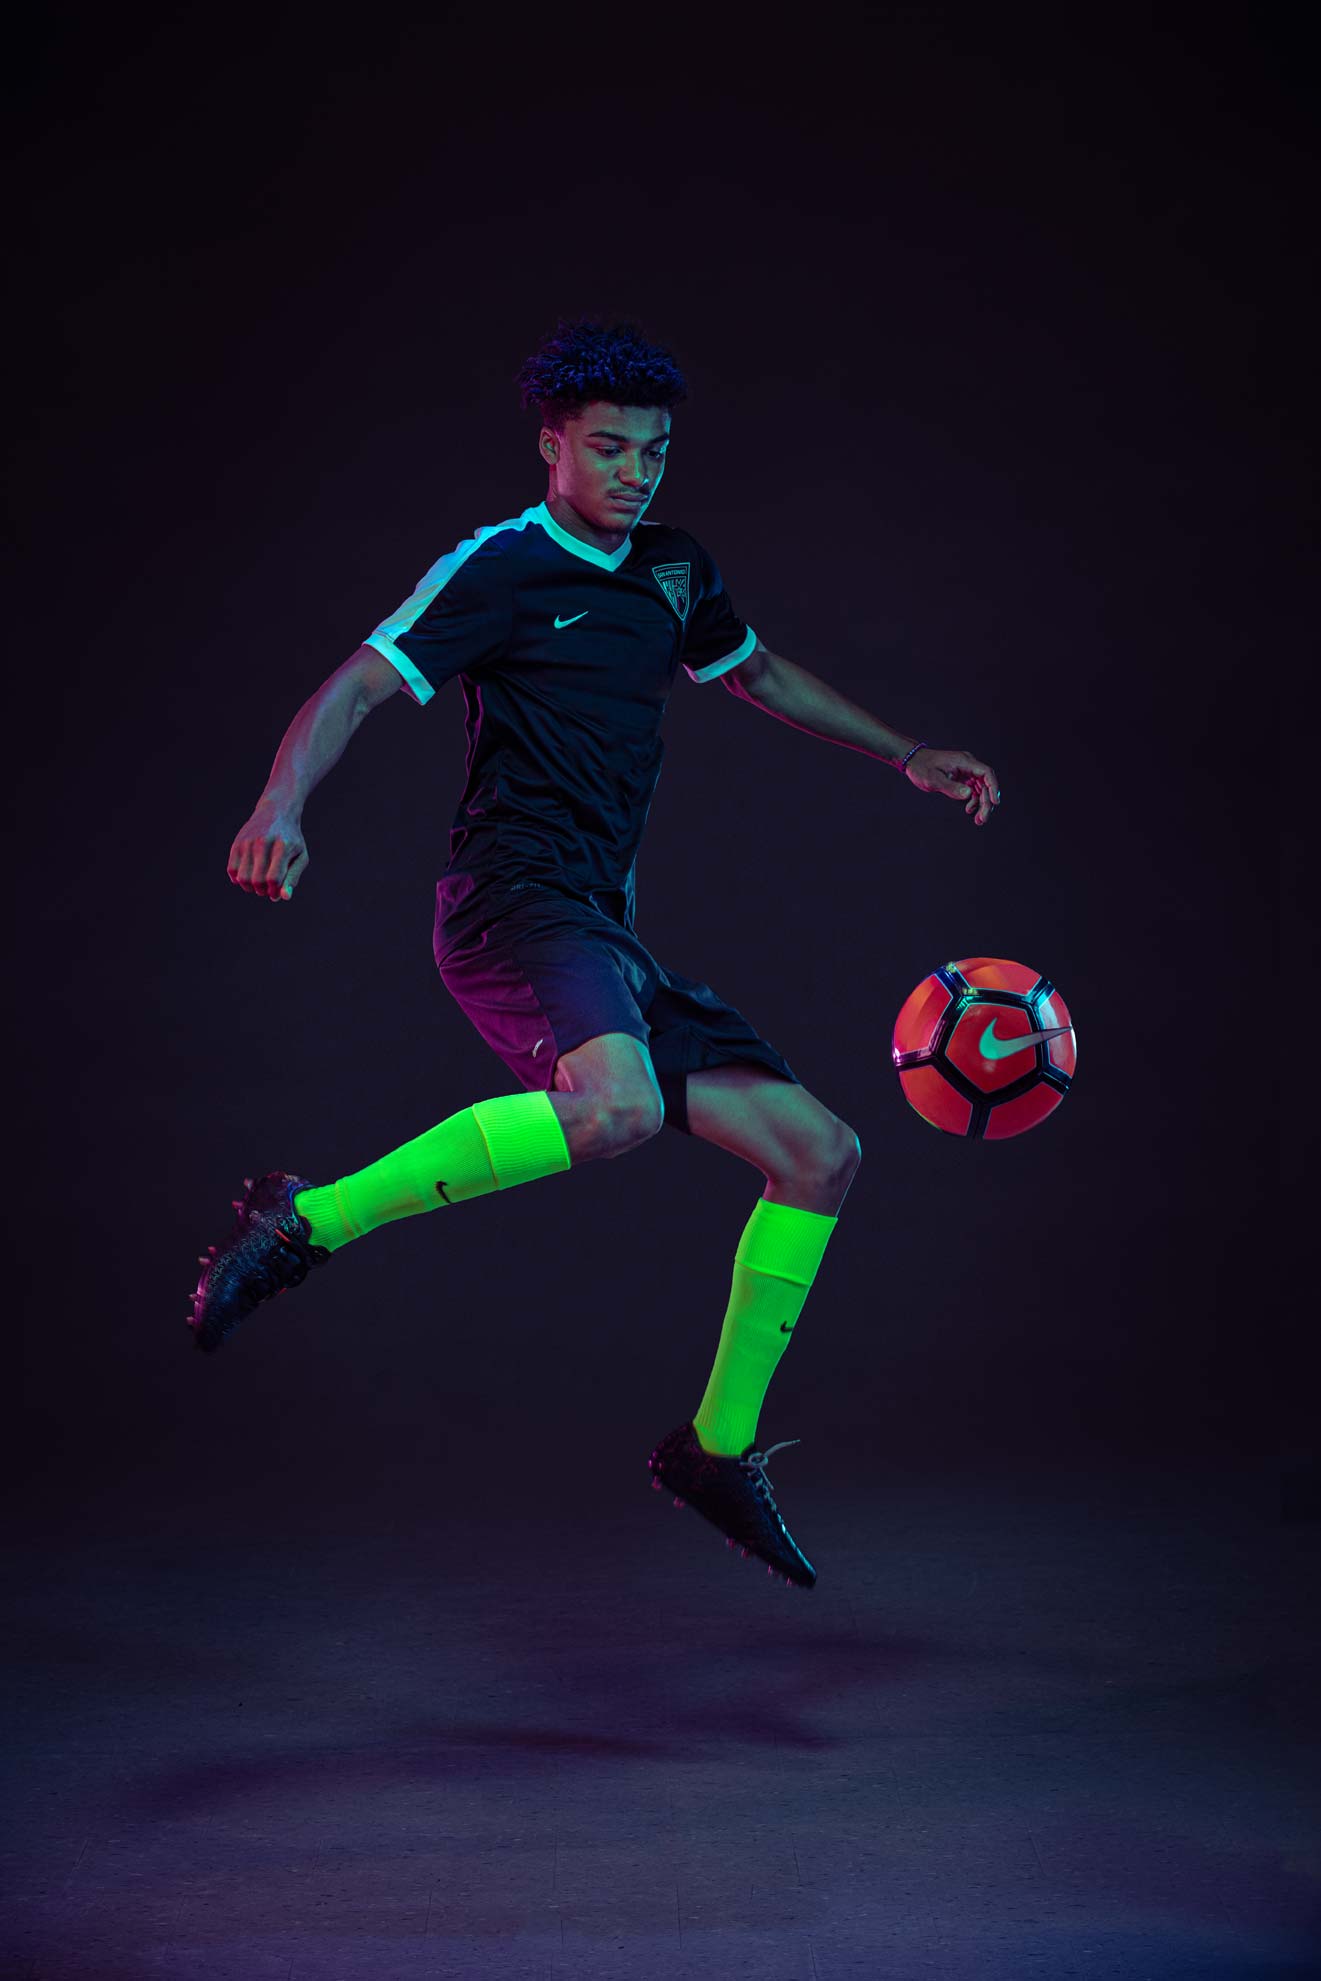 A soccer player jumping a kicking a ball in a studio environment